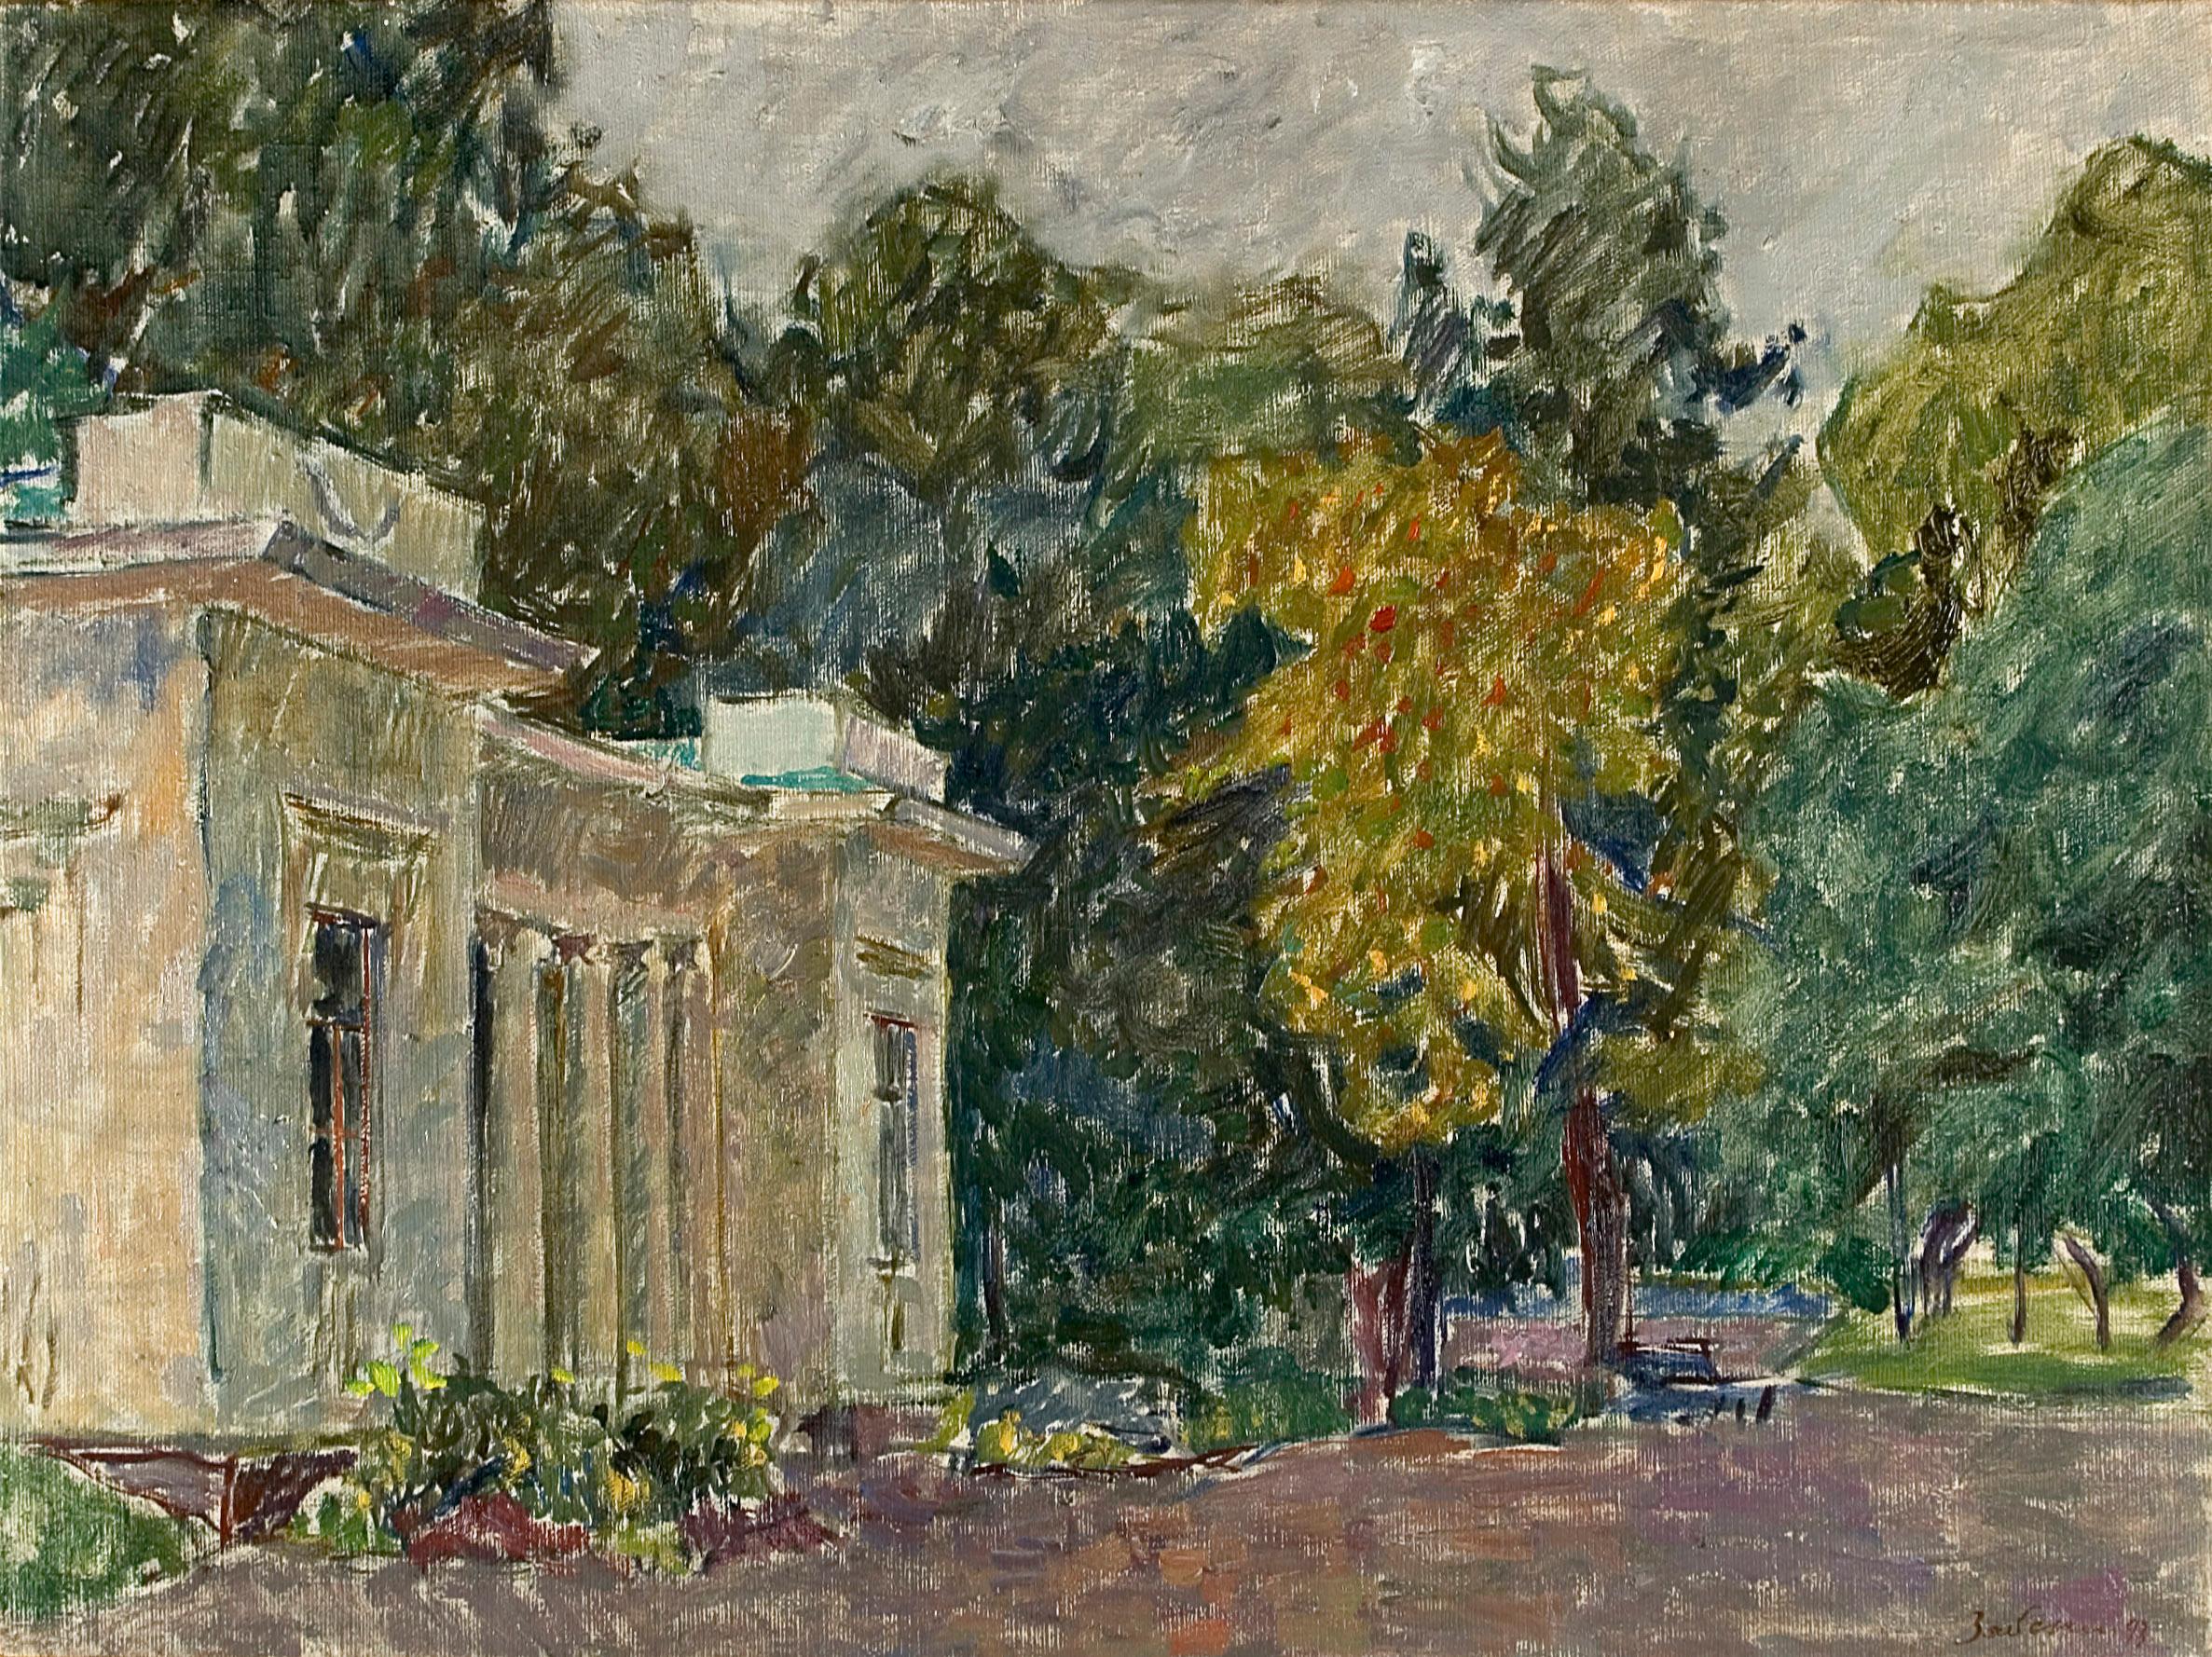 Vyacheslav Zabelin (1935- 2001) Considered a living master during his lifetime in Moscow, painted In the Old Park in 1993. Zabelin had already 300 paintings in museum collections throughout the world at the time of his death. A Surikov professor and